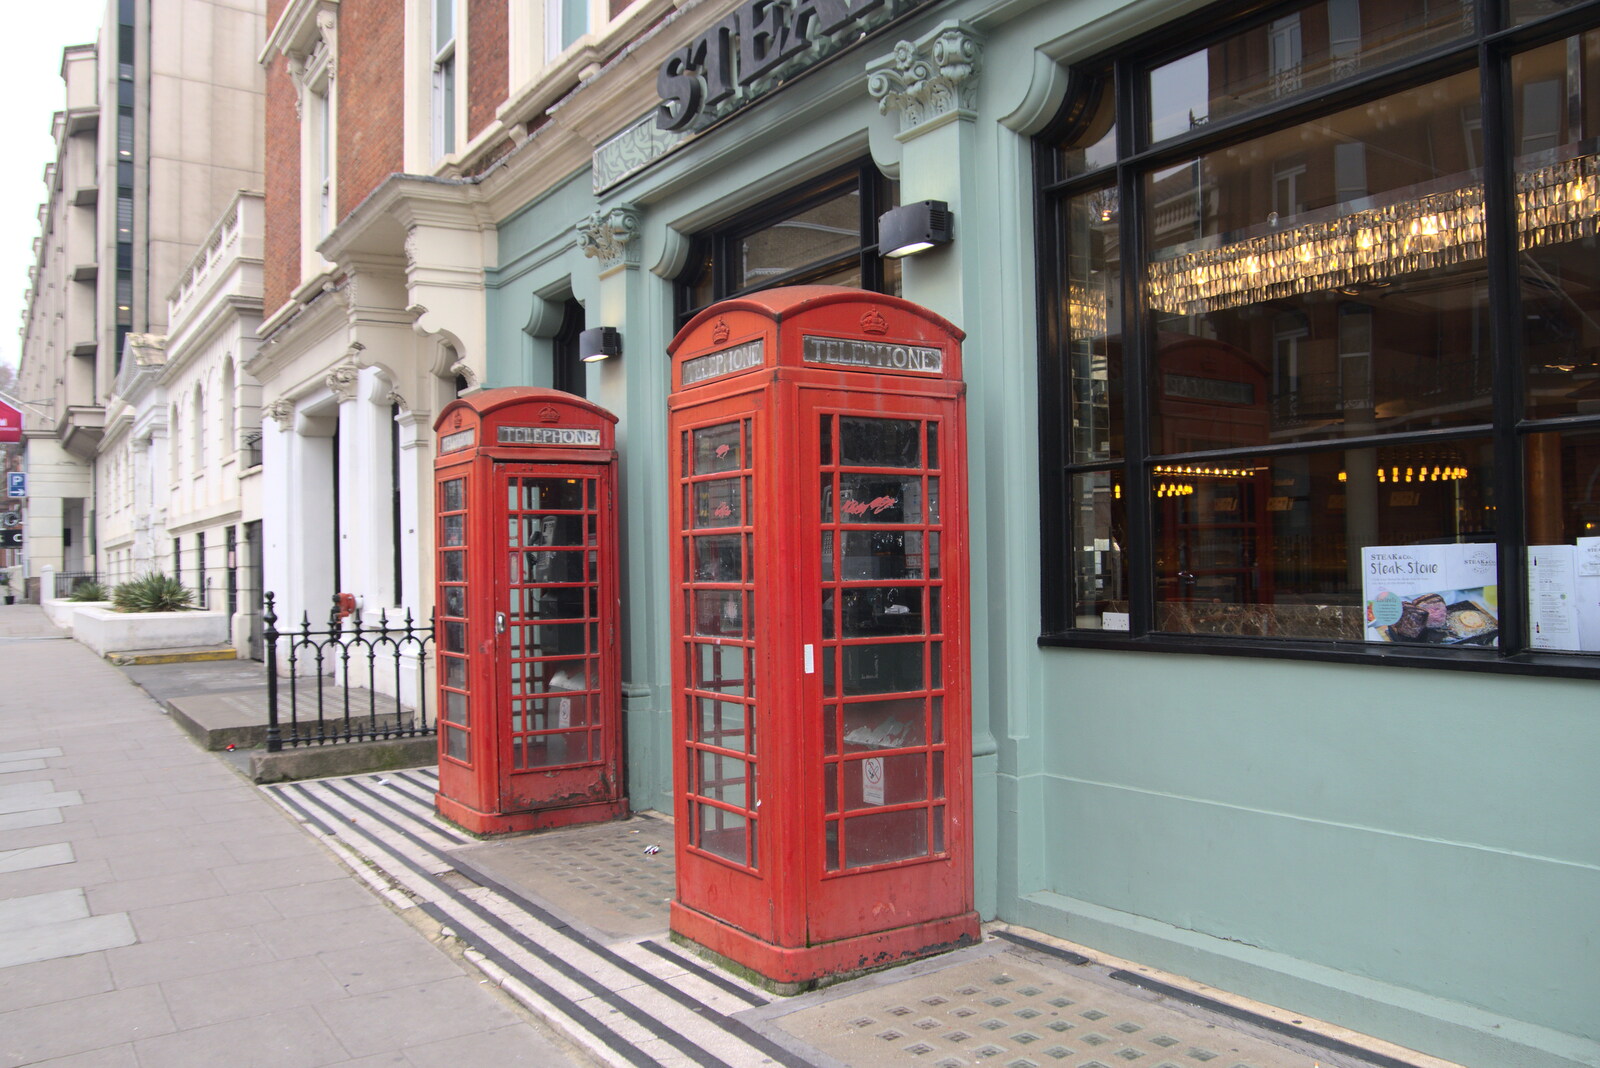 A couple of neglected K6 phone boxes from A Trip to the Natural History Museum, Kensington, London - 15th January 2022